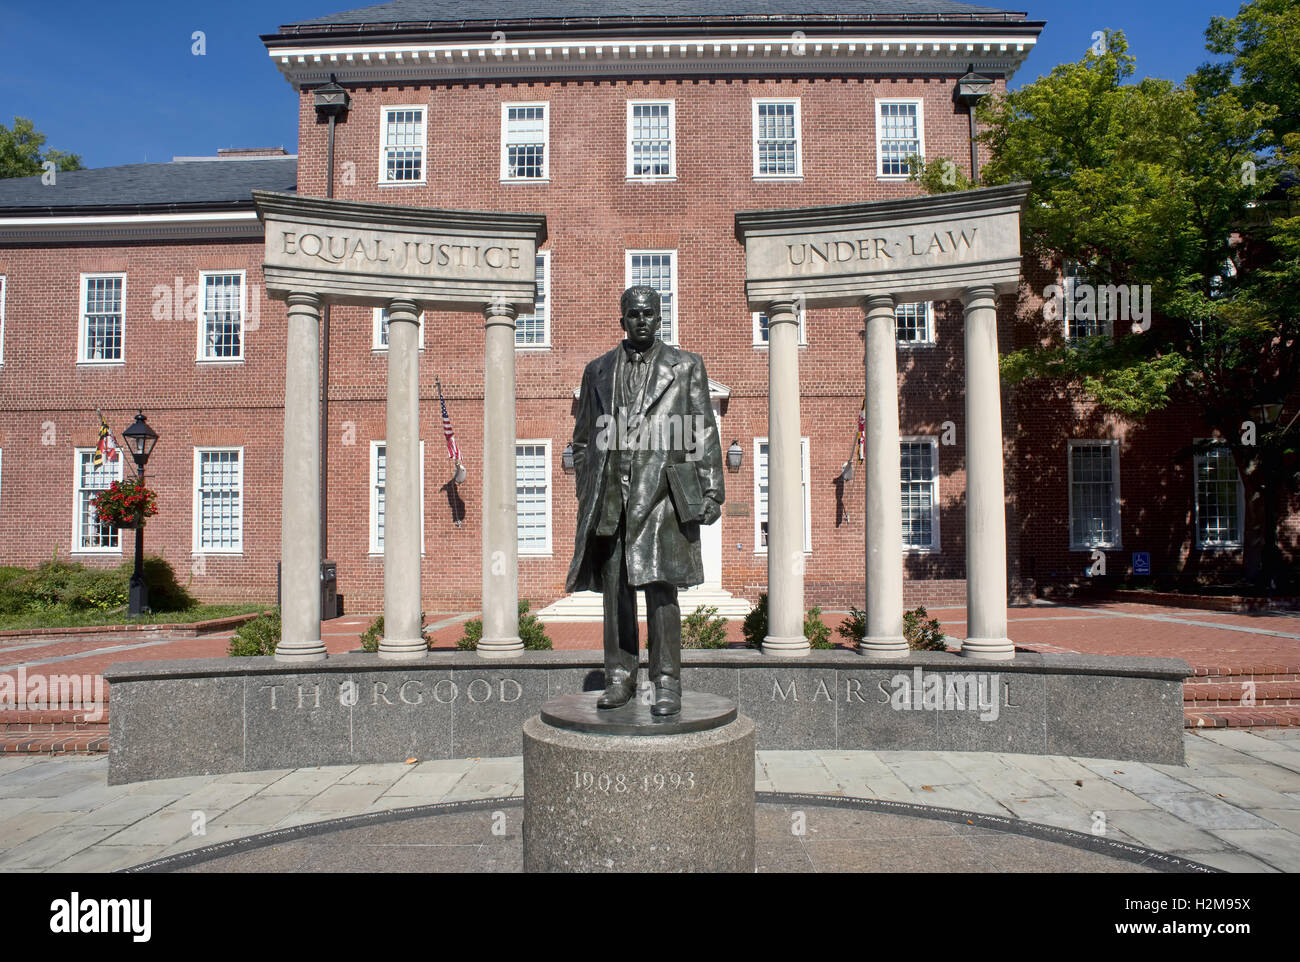 Annapolis Maryland - Sept. 25,2016  US Supreme Court justice Thurgood Marshall  statue with Equal Justice Under Law . Stock Photo